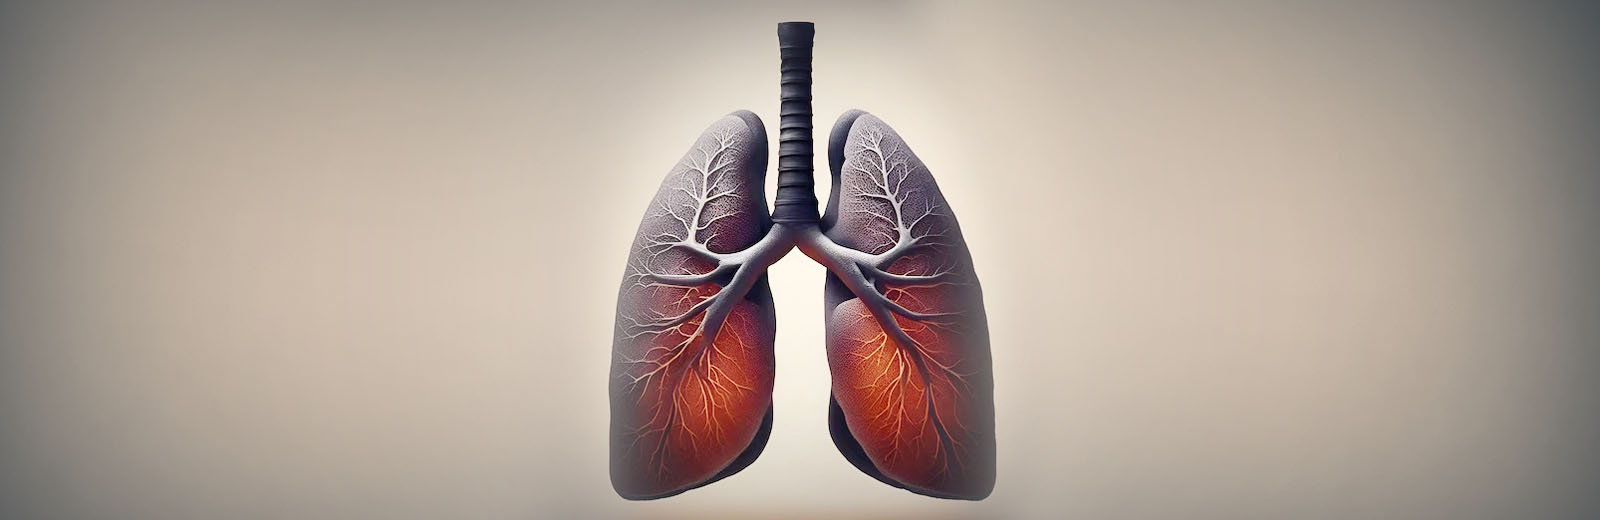 How to fix a Collapsed Lung (pneumothorax)?